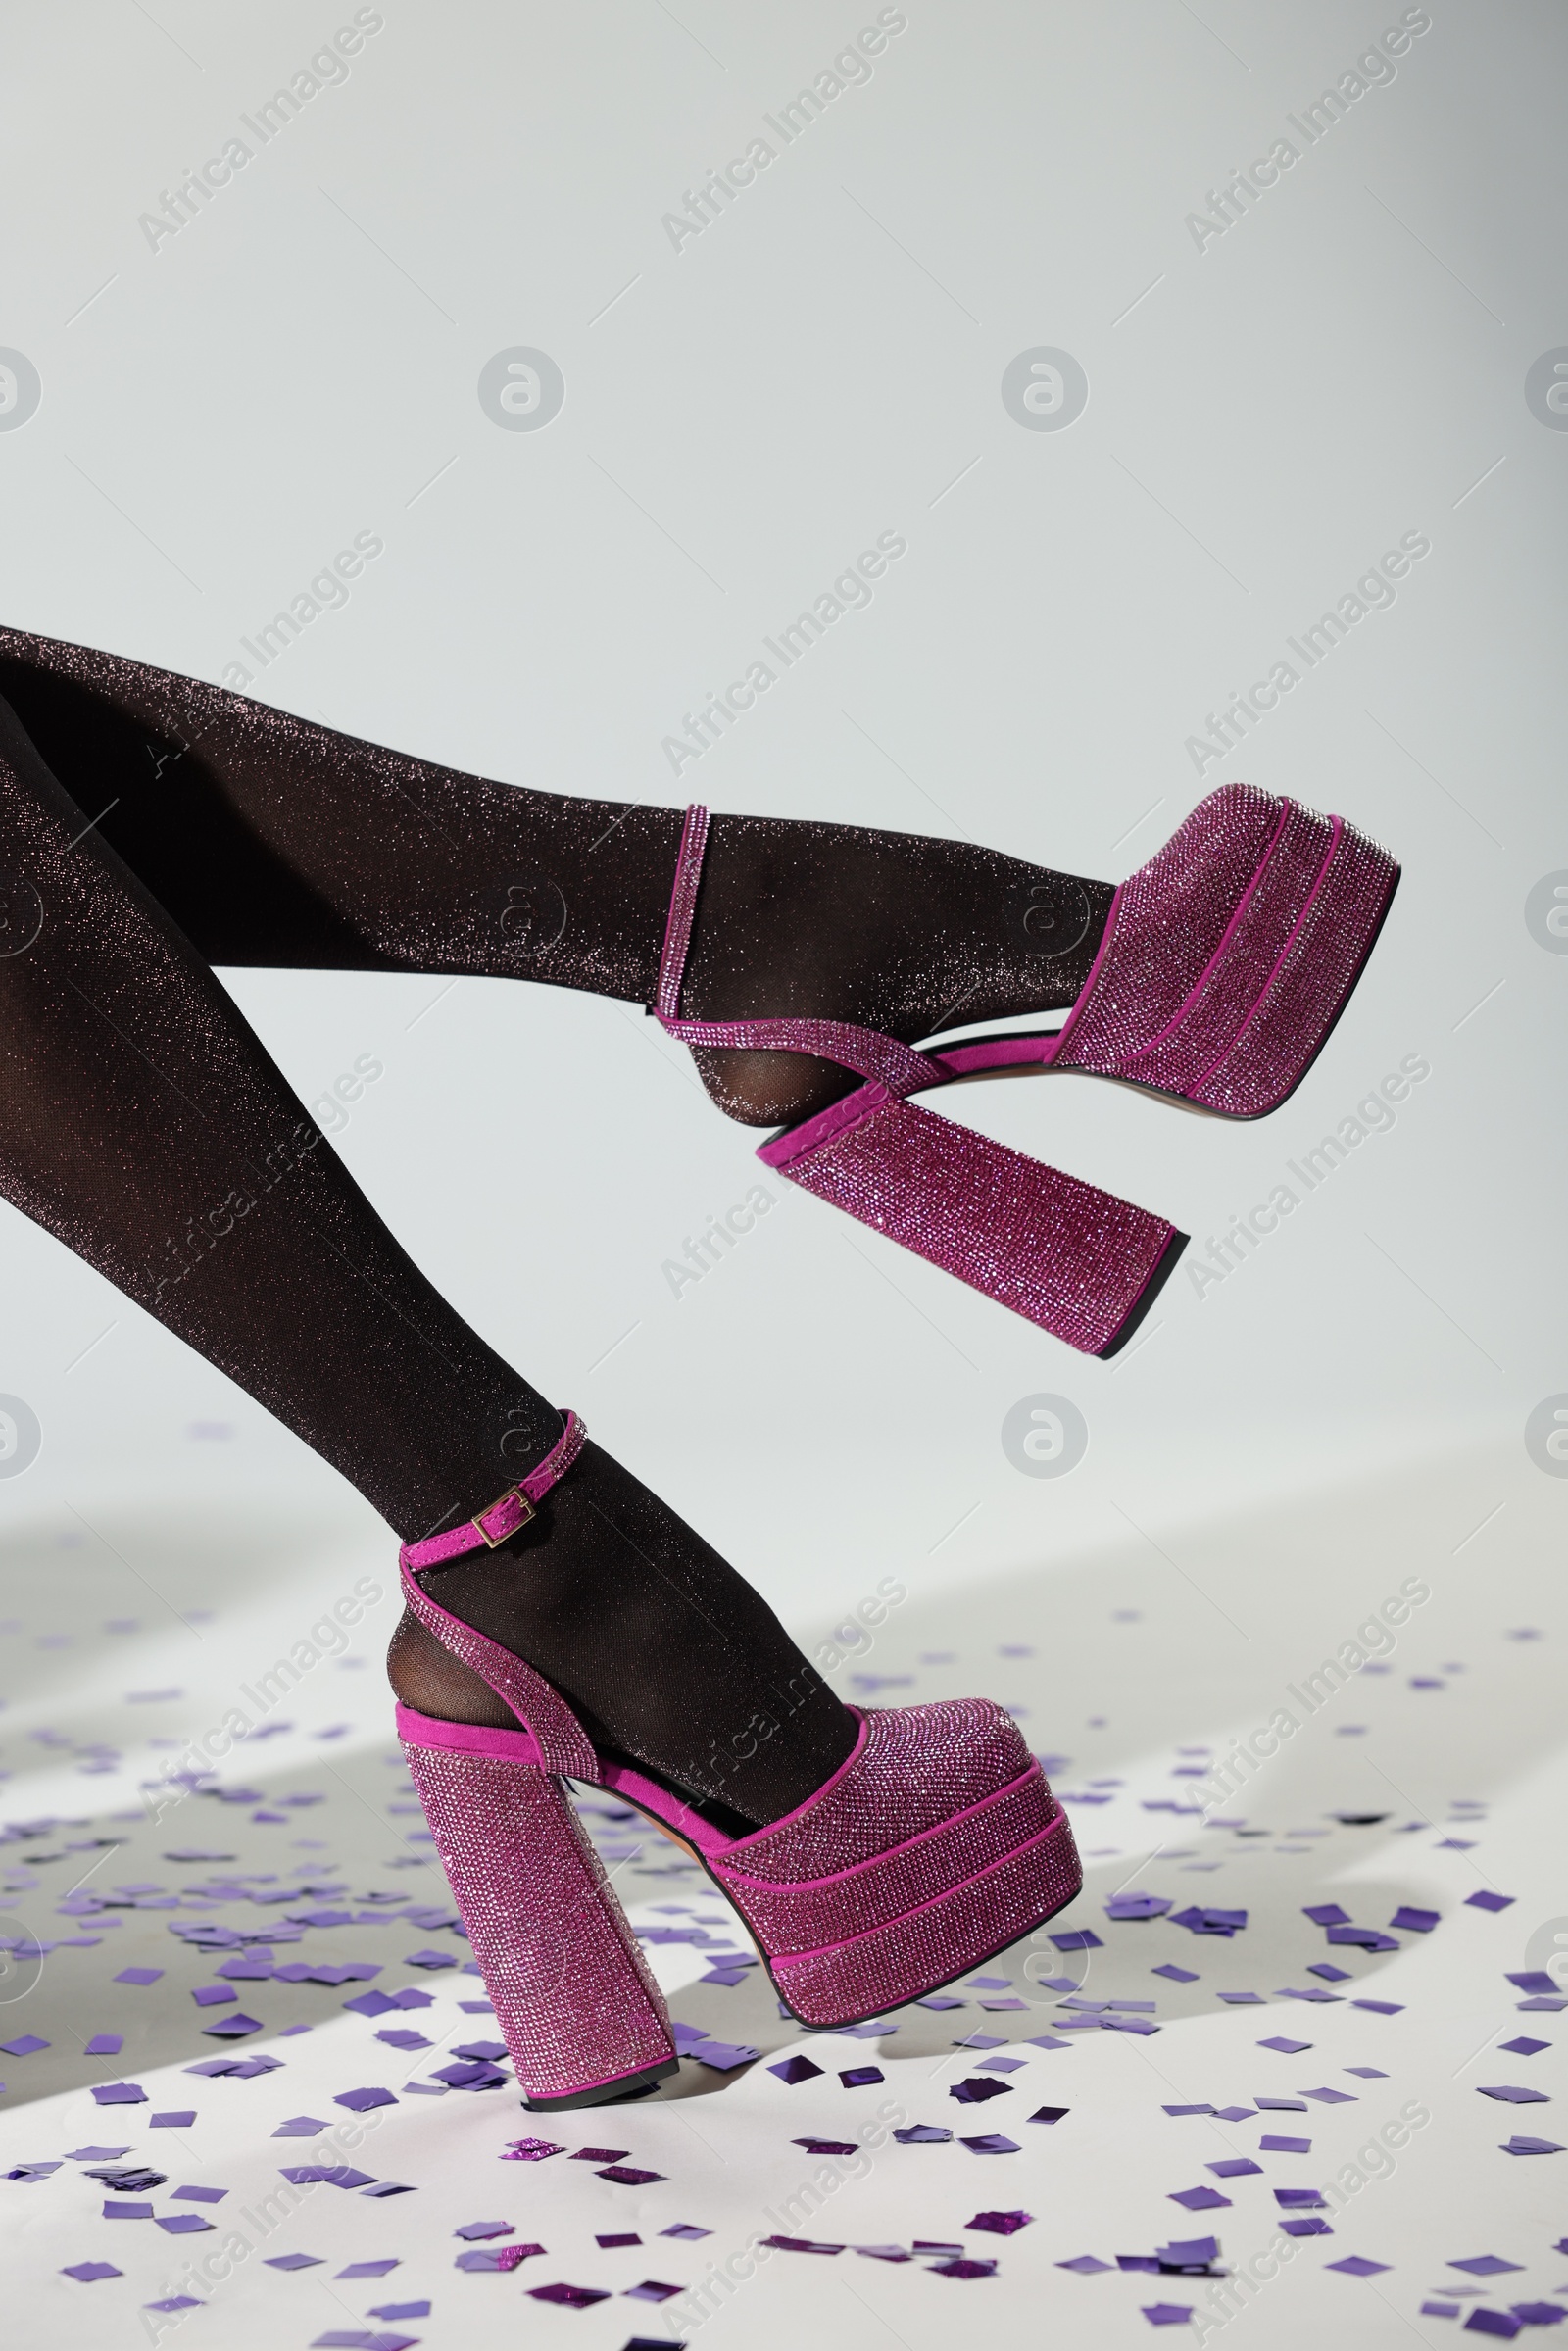 Photo of Stylish party. Woman wearing pink high heeled shoes with platform and square toes on light grey background, closeup